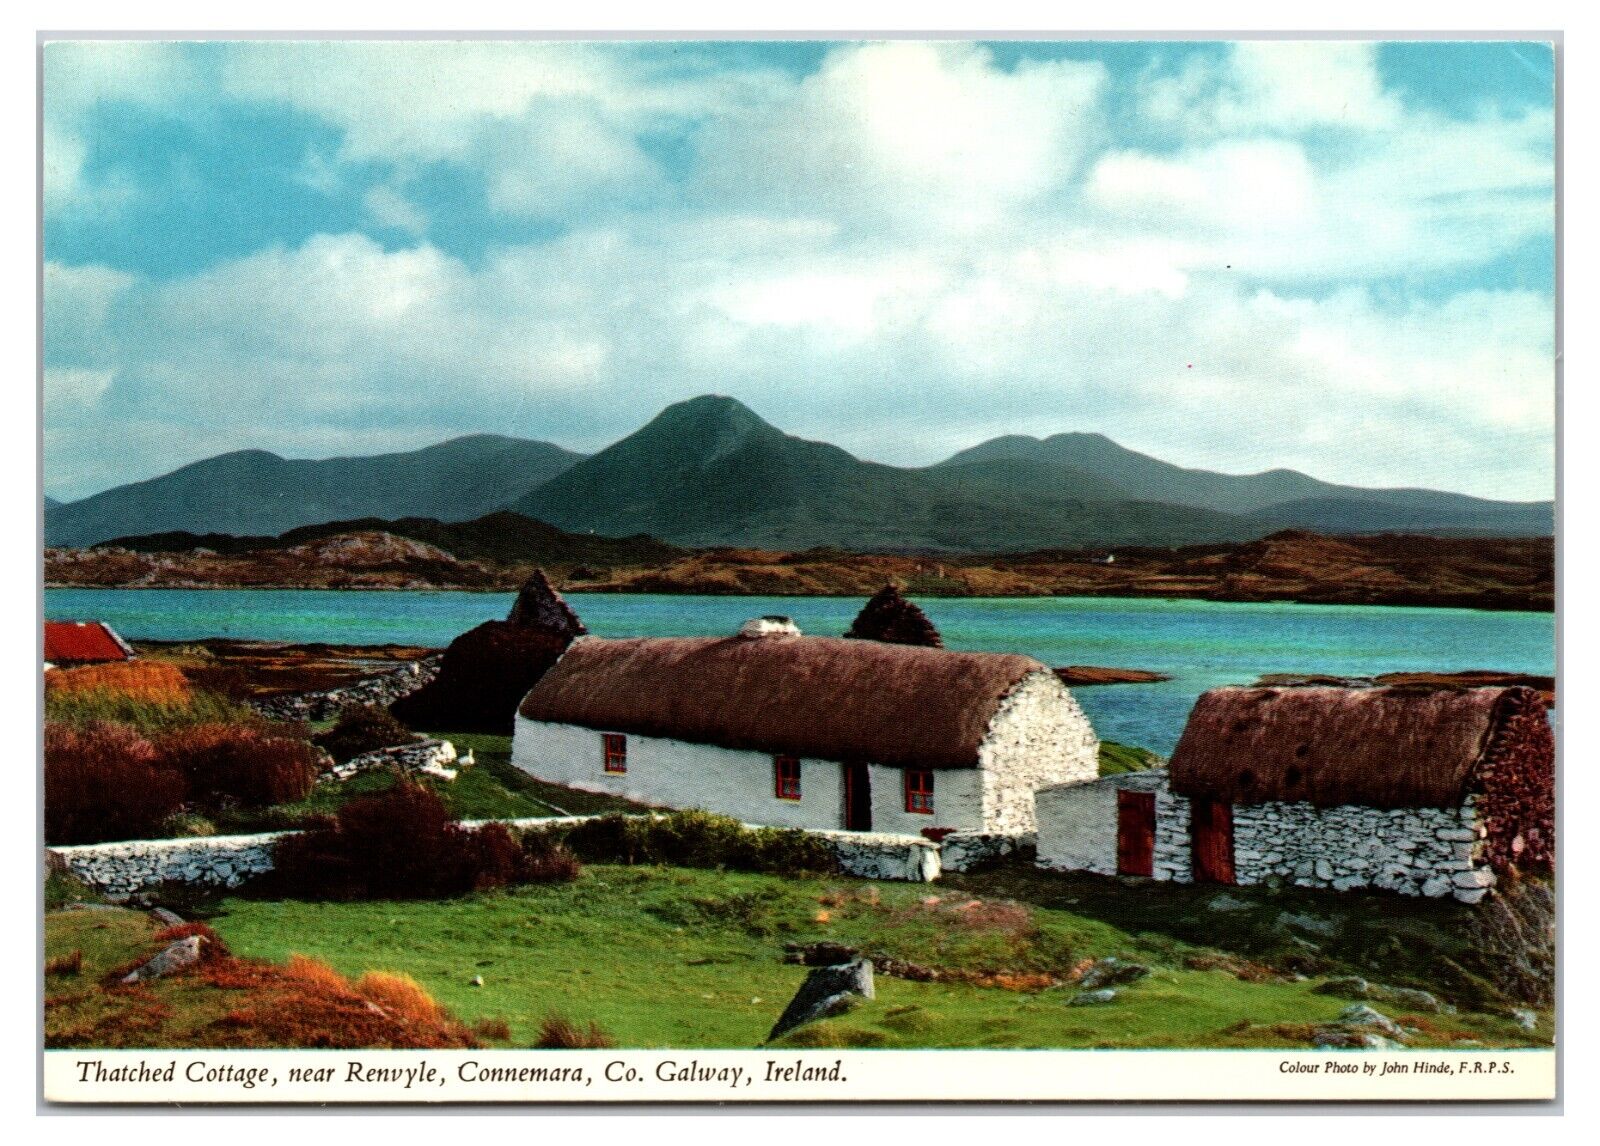 Vintage 1960s - Thatched Cottage - Galway, Ireland Postcard (UnPosted)